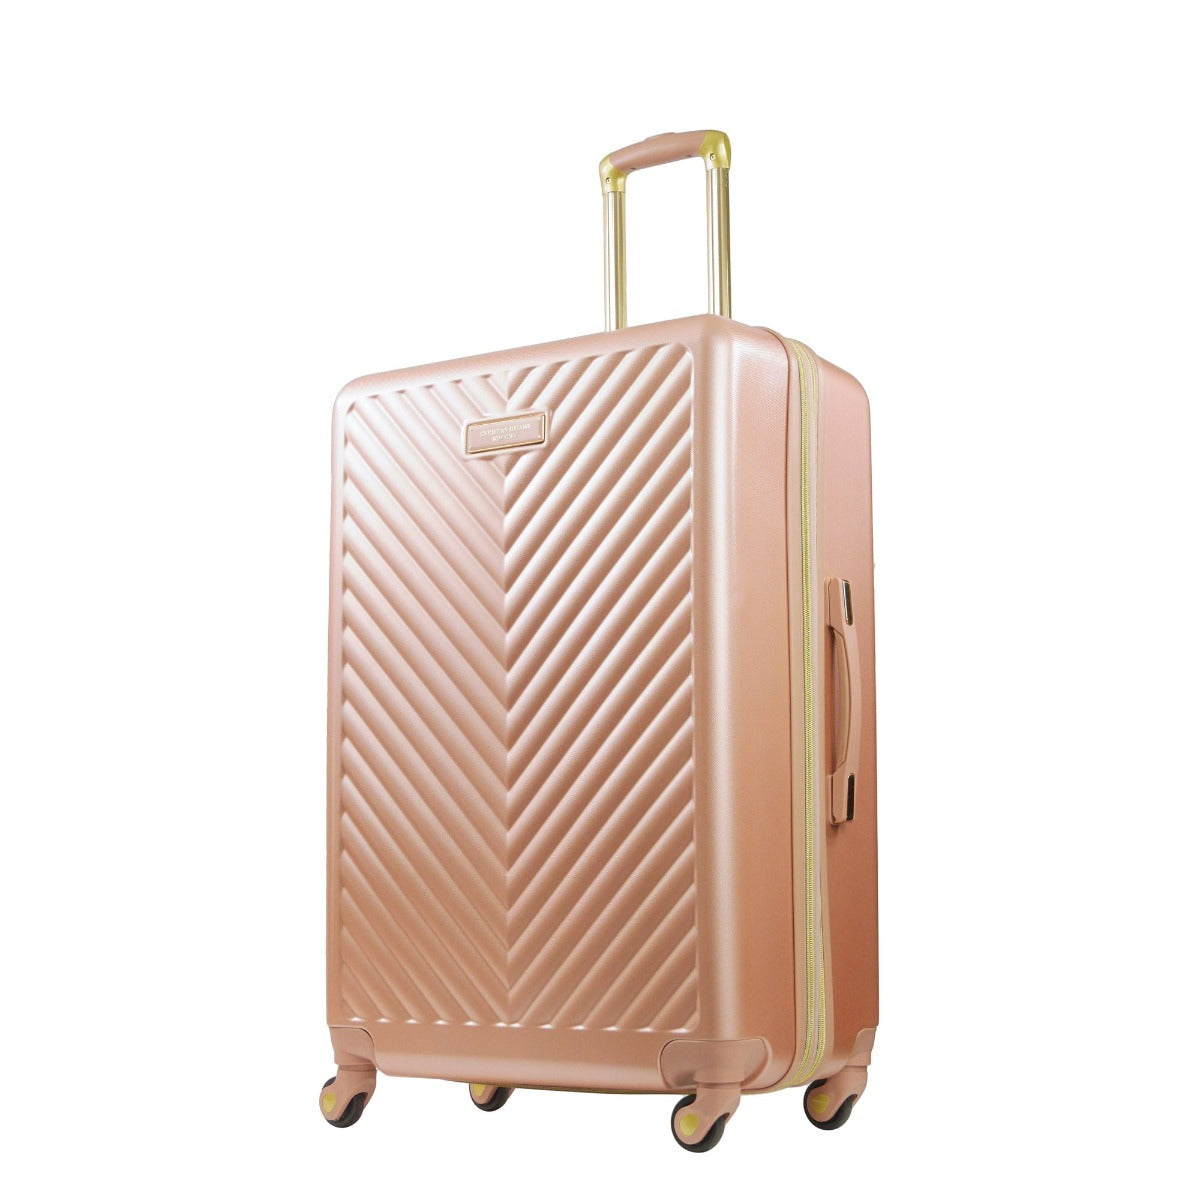 Christian Siriano Addie 29 inch checked luggage hardside spinner suitcase rose gold - best suitcases for travel 